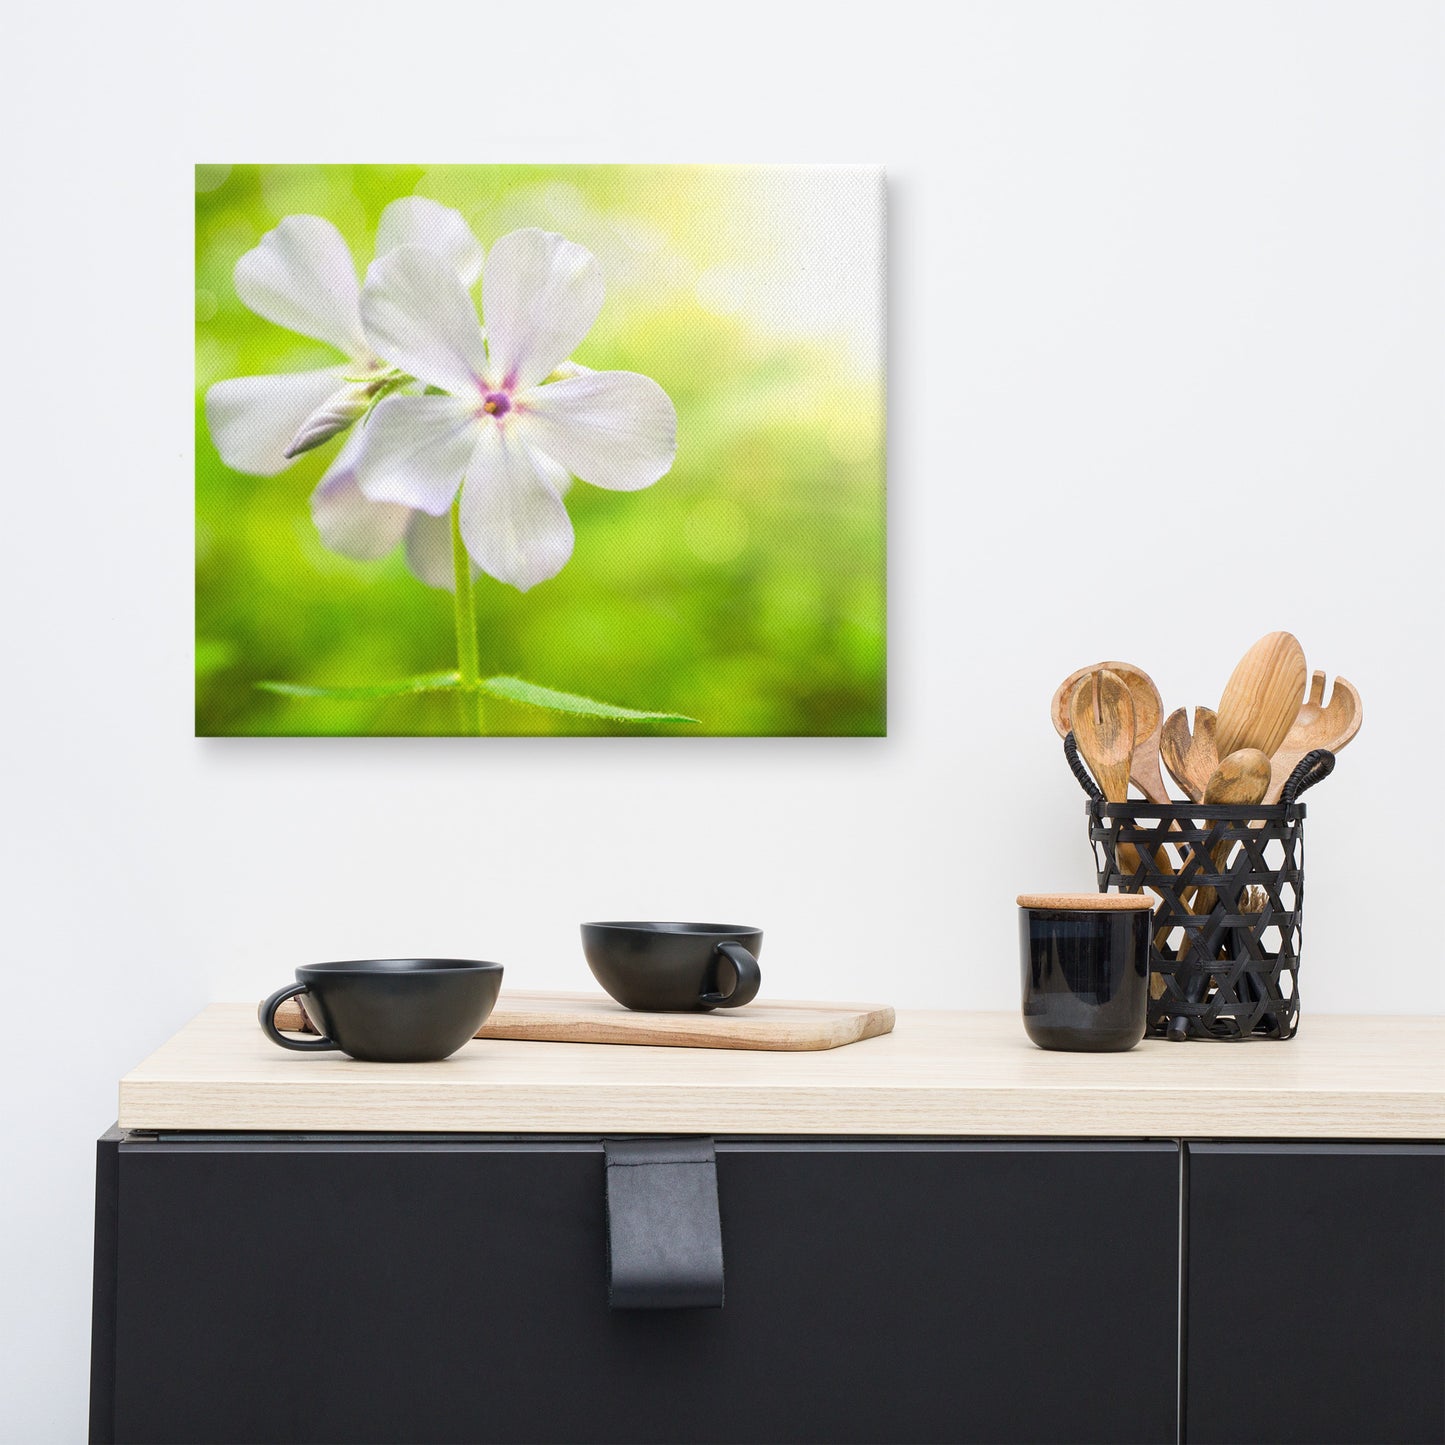 Beauty of the Forest Floor Floral Nature Canvas Wall Art Prints